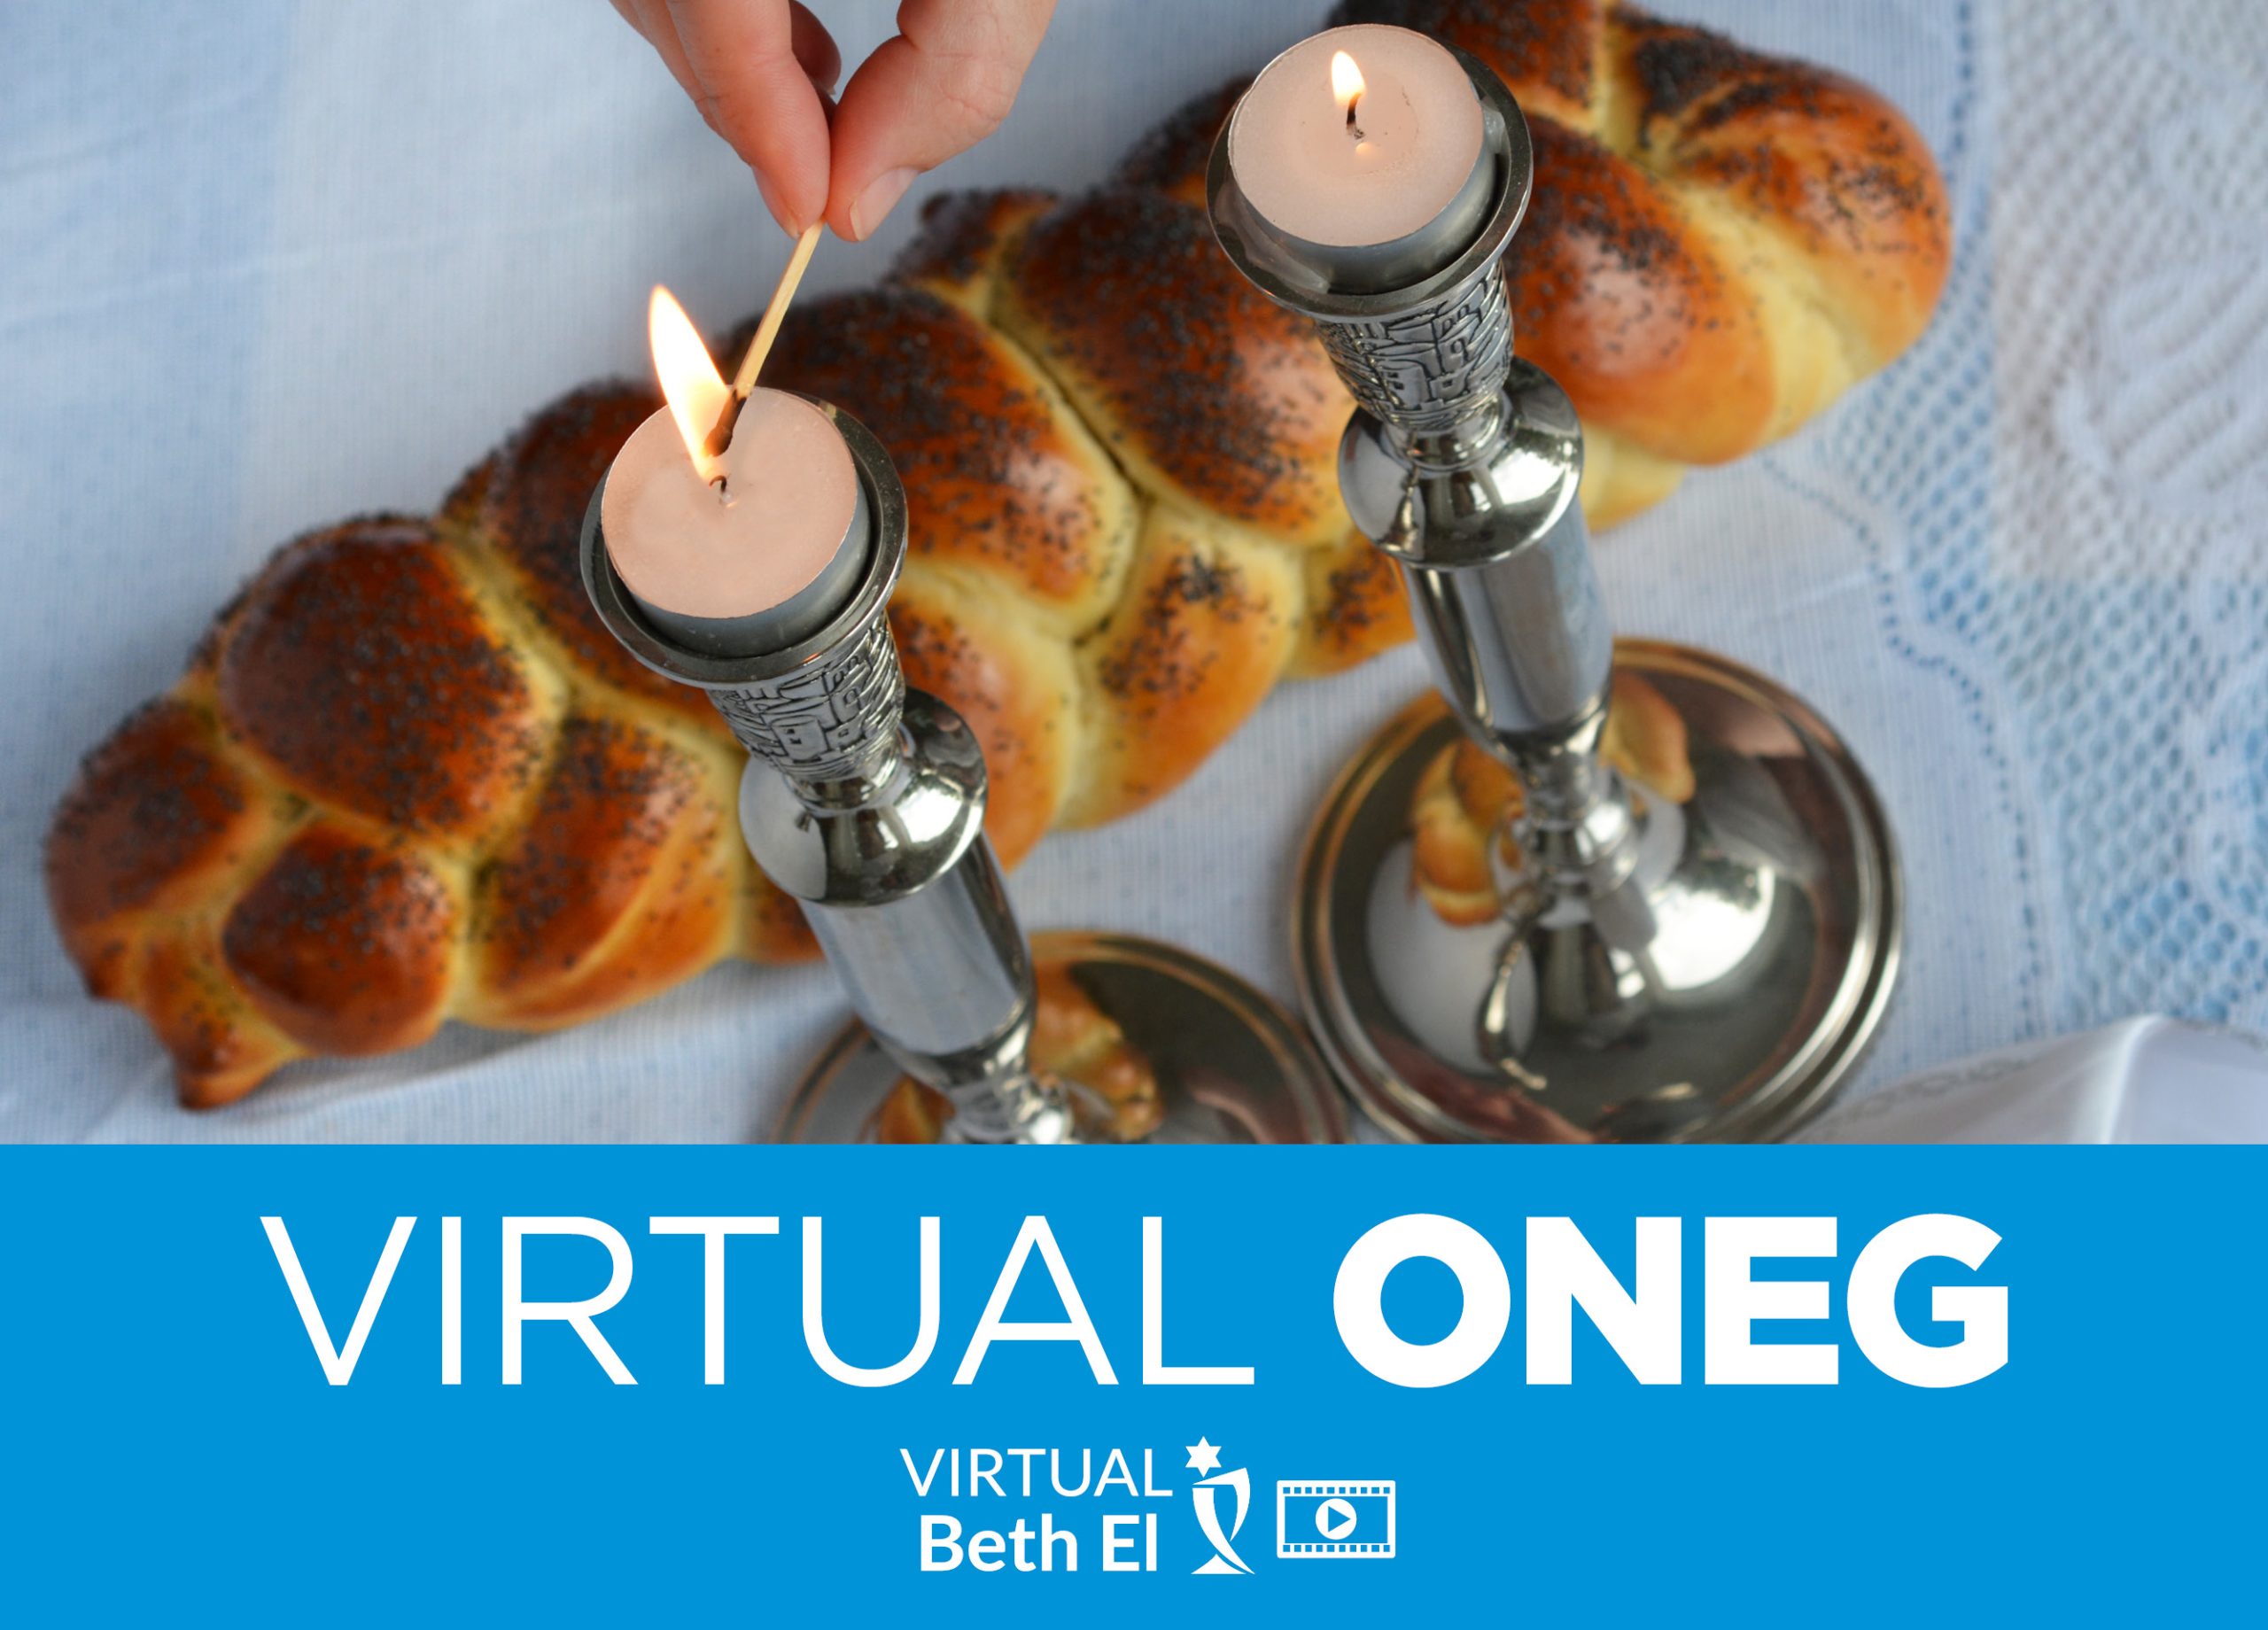 Virtual Oneg event graphic for Temple Beth El of Boca Raton